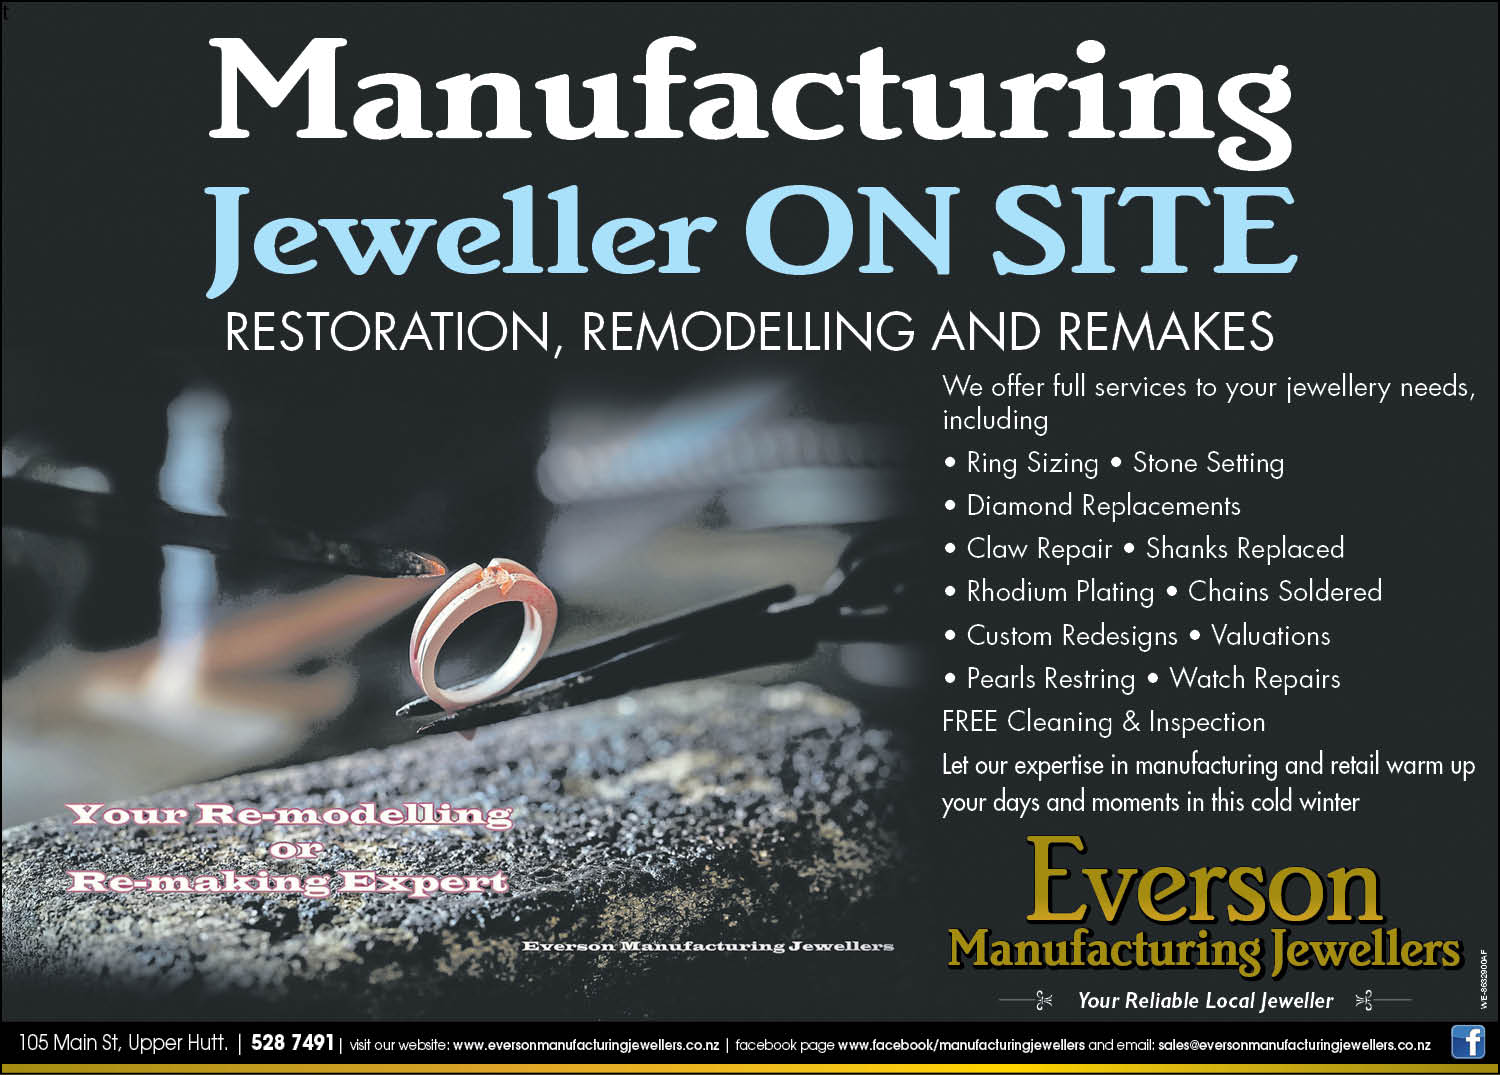 Everson Manufacturing Jewellers